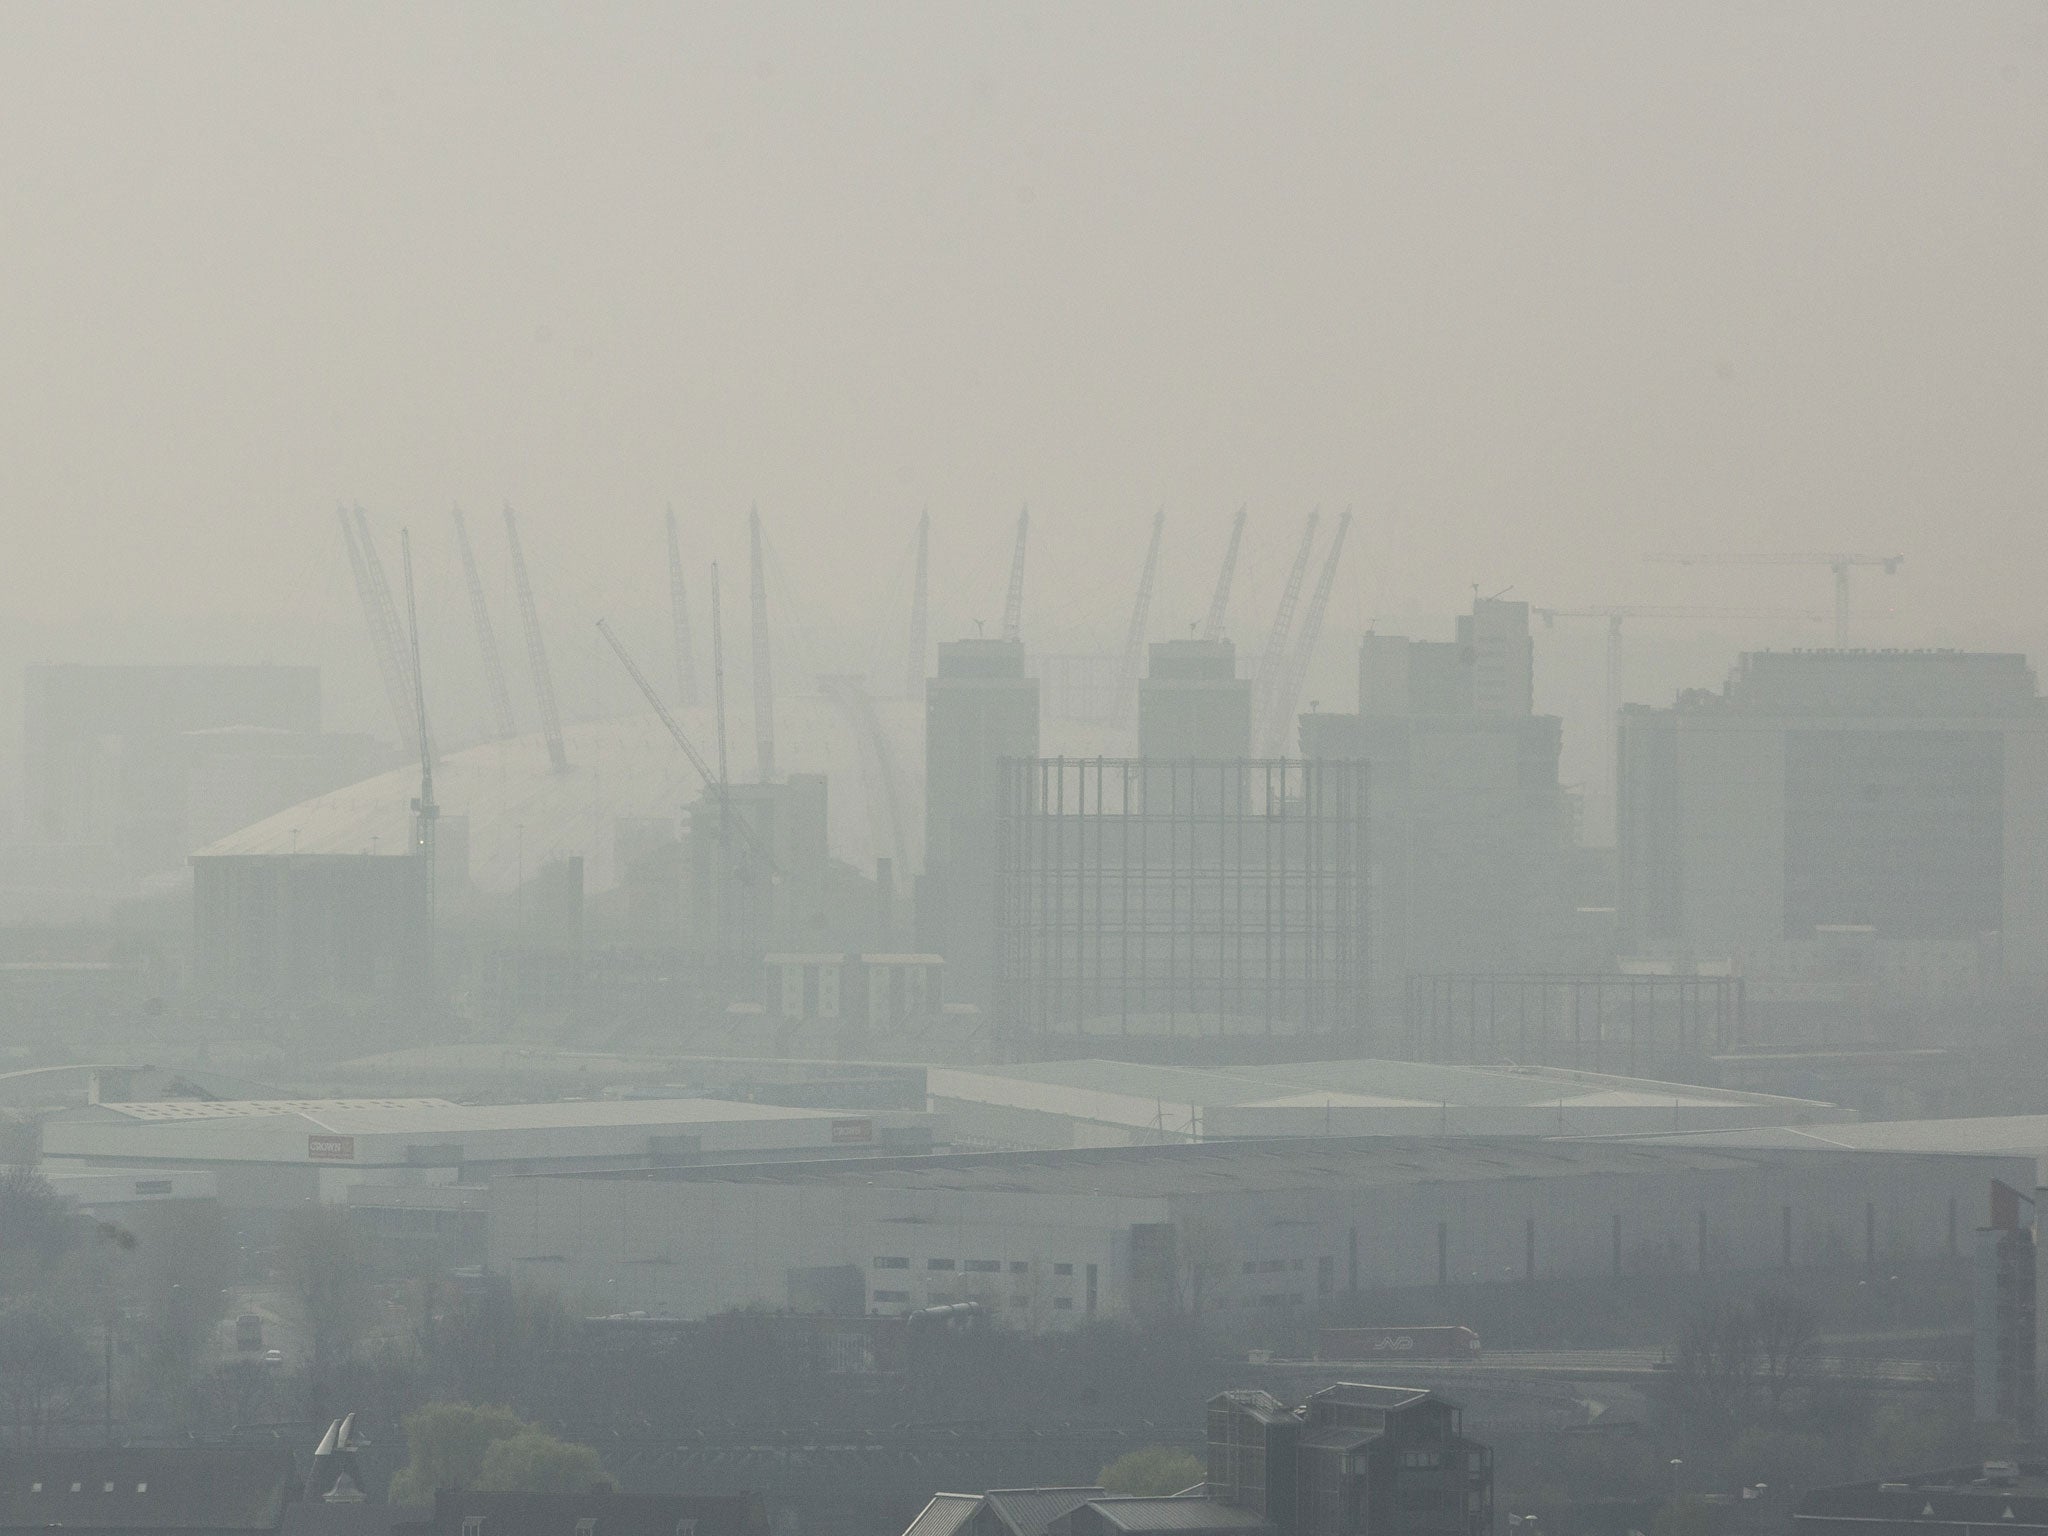 A view of the 02 Arena through smog on April 2, 2014, when dust from the Sahara combined with pollution from mainland Europe to create one of the worst smogs of the year